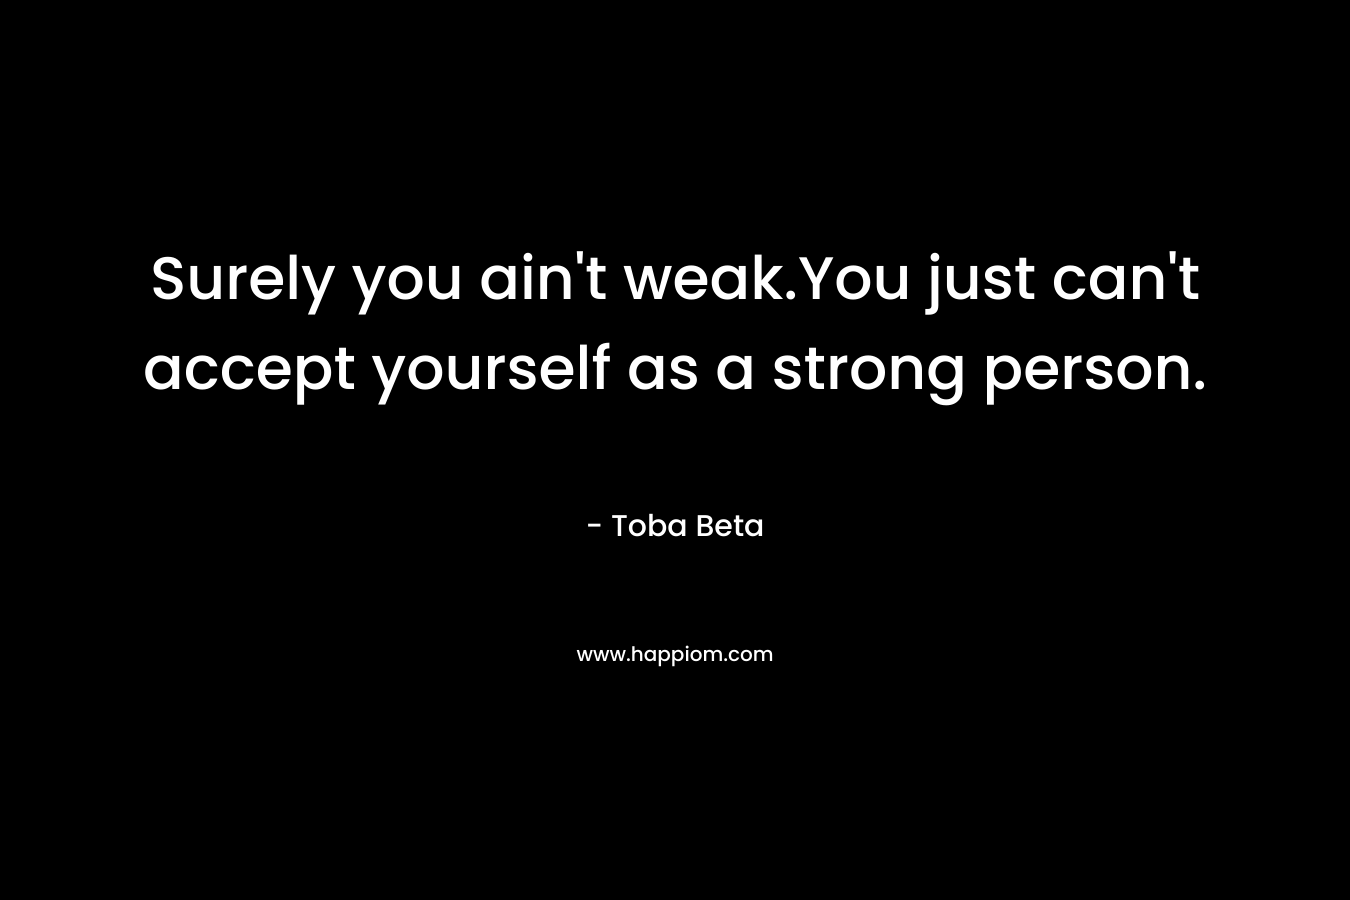 Surely you ain't weak.You just can't accept yourself as a strong person.